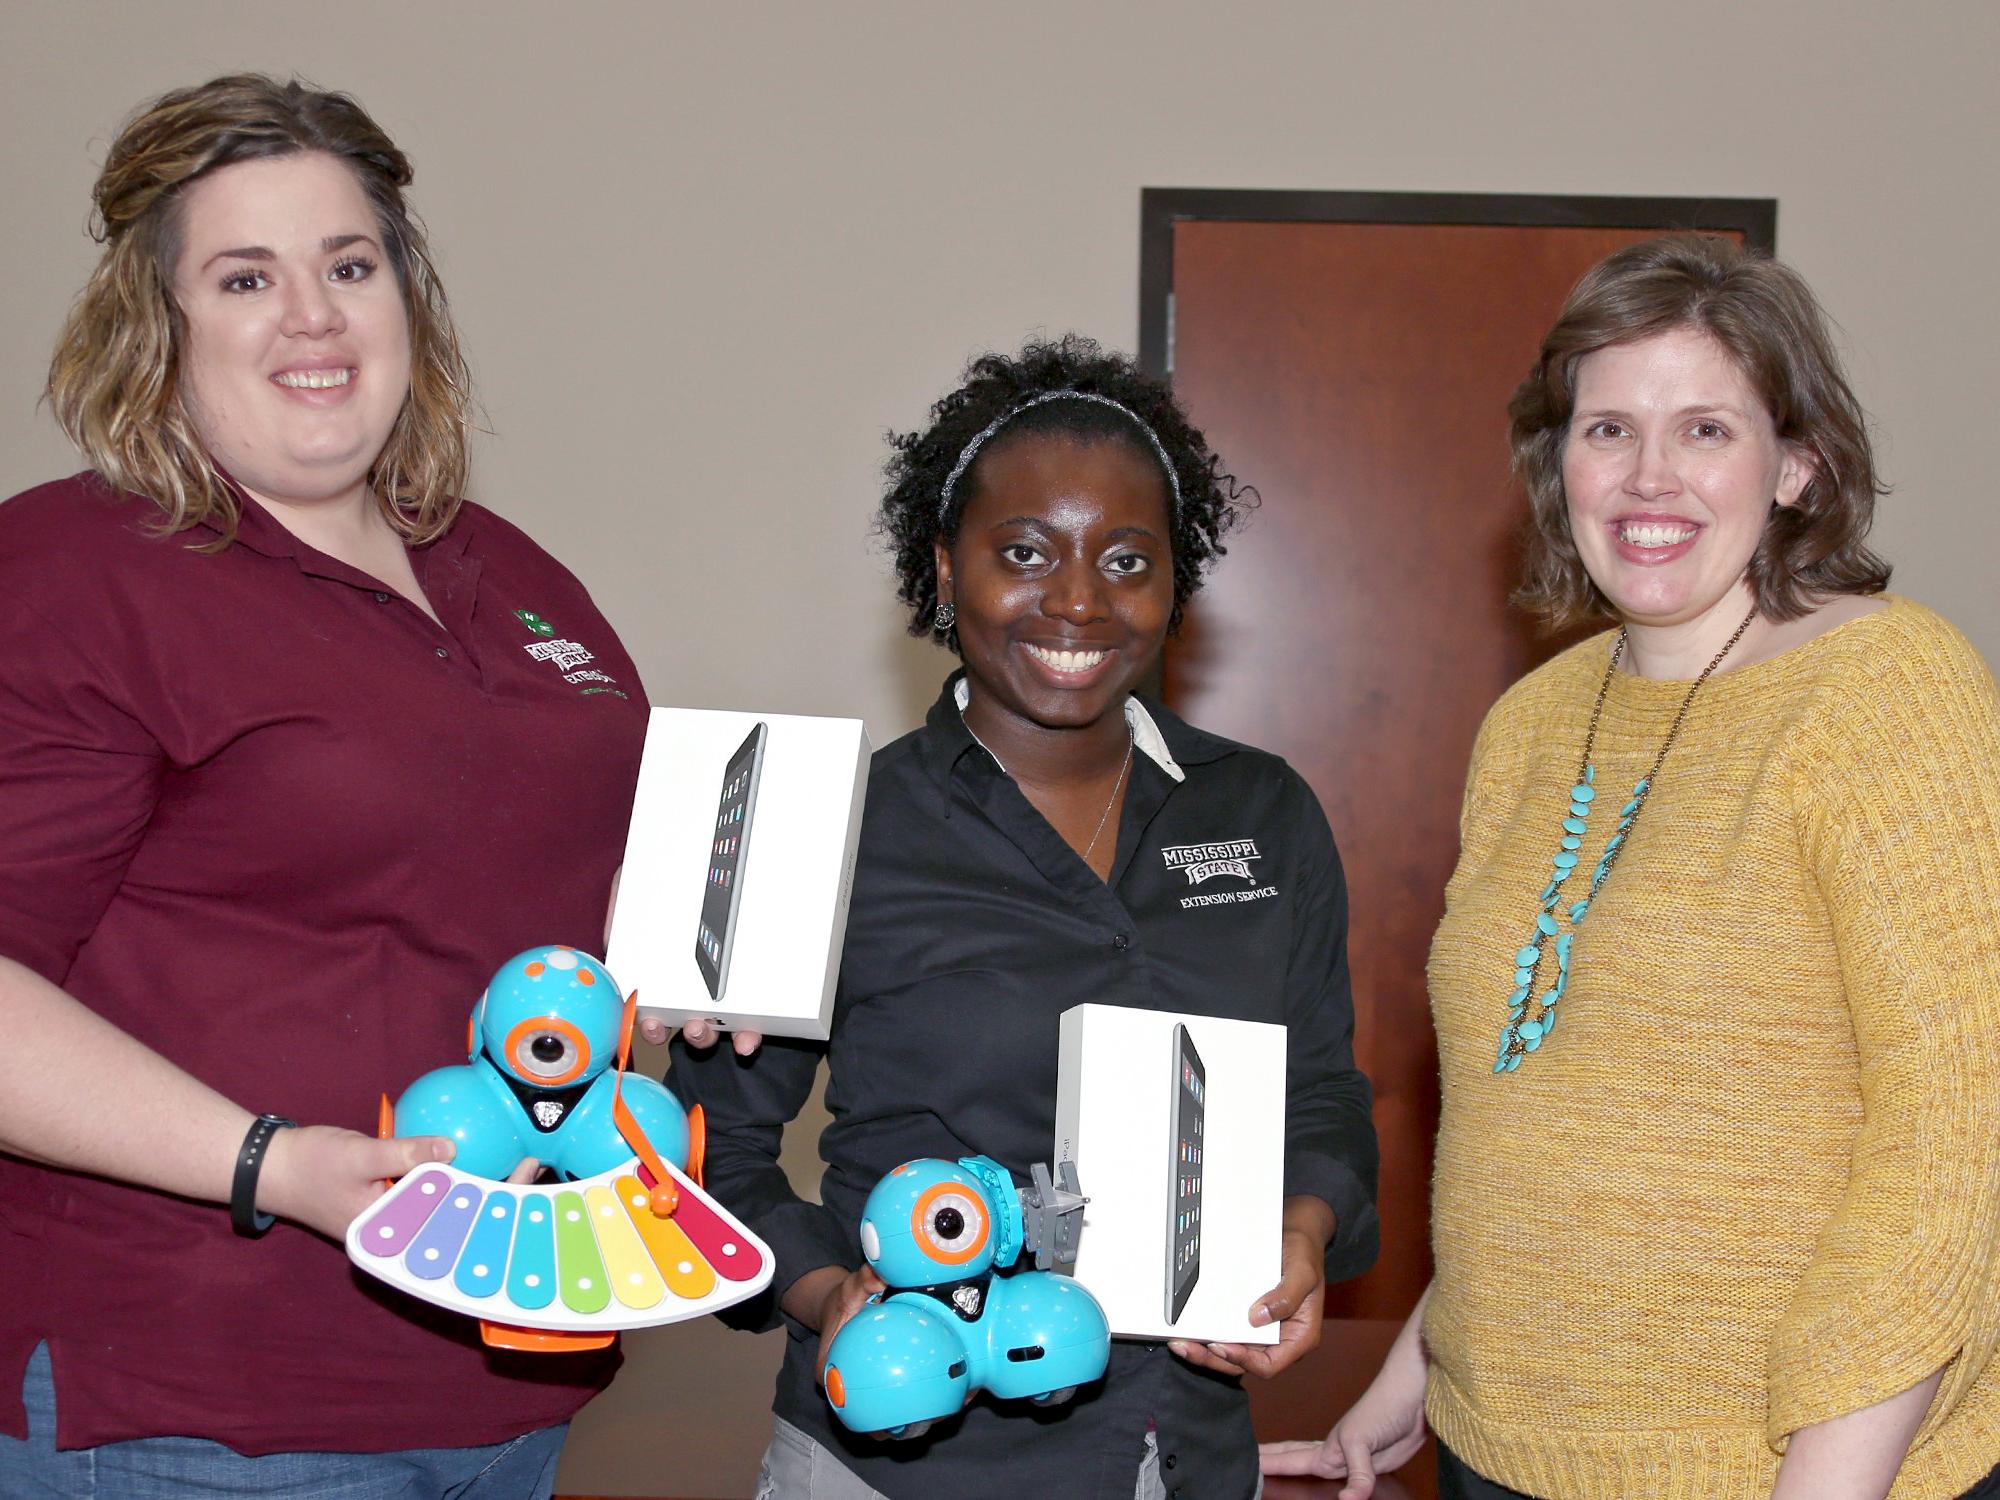 Mississippi State University Extension Service agents Jennifer Williams of Webster County, left, and Monet Kees of Pearl River County hold Dash & Dot interactive robots used by young 4-H’ers to learn STEM concepts. At right is Mariah Smith, an assistant Extension professor with the Center for Technology Outreach. Smith developed a curriculum last year that uses the robots along with mini iPads, all of which were funded through a $14,000 grant from the Verizon Foundation. (Photo by MSU Extension Service/Kat 